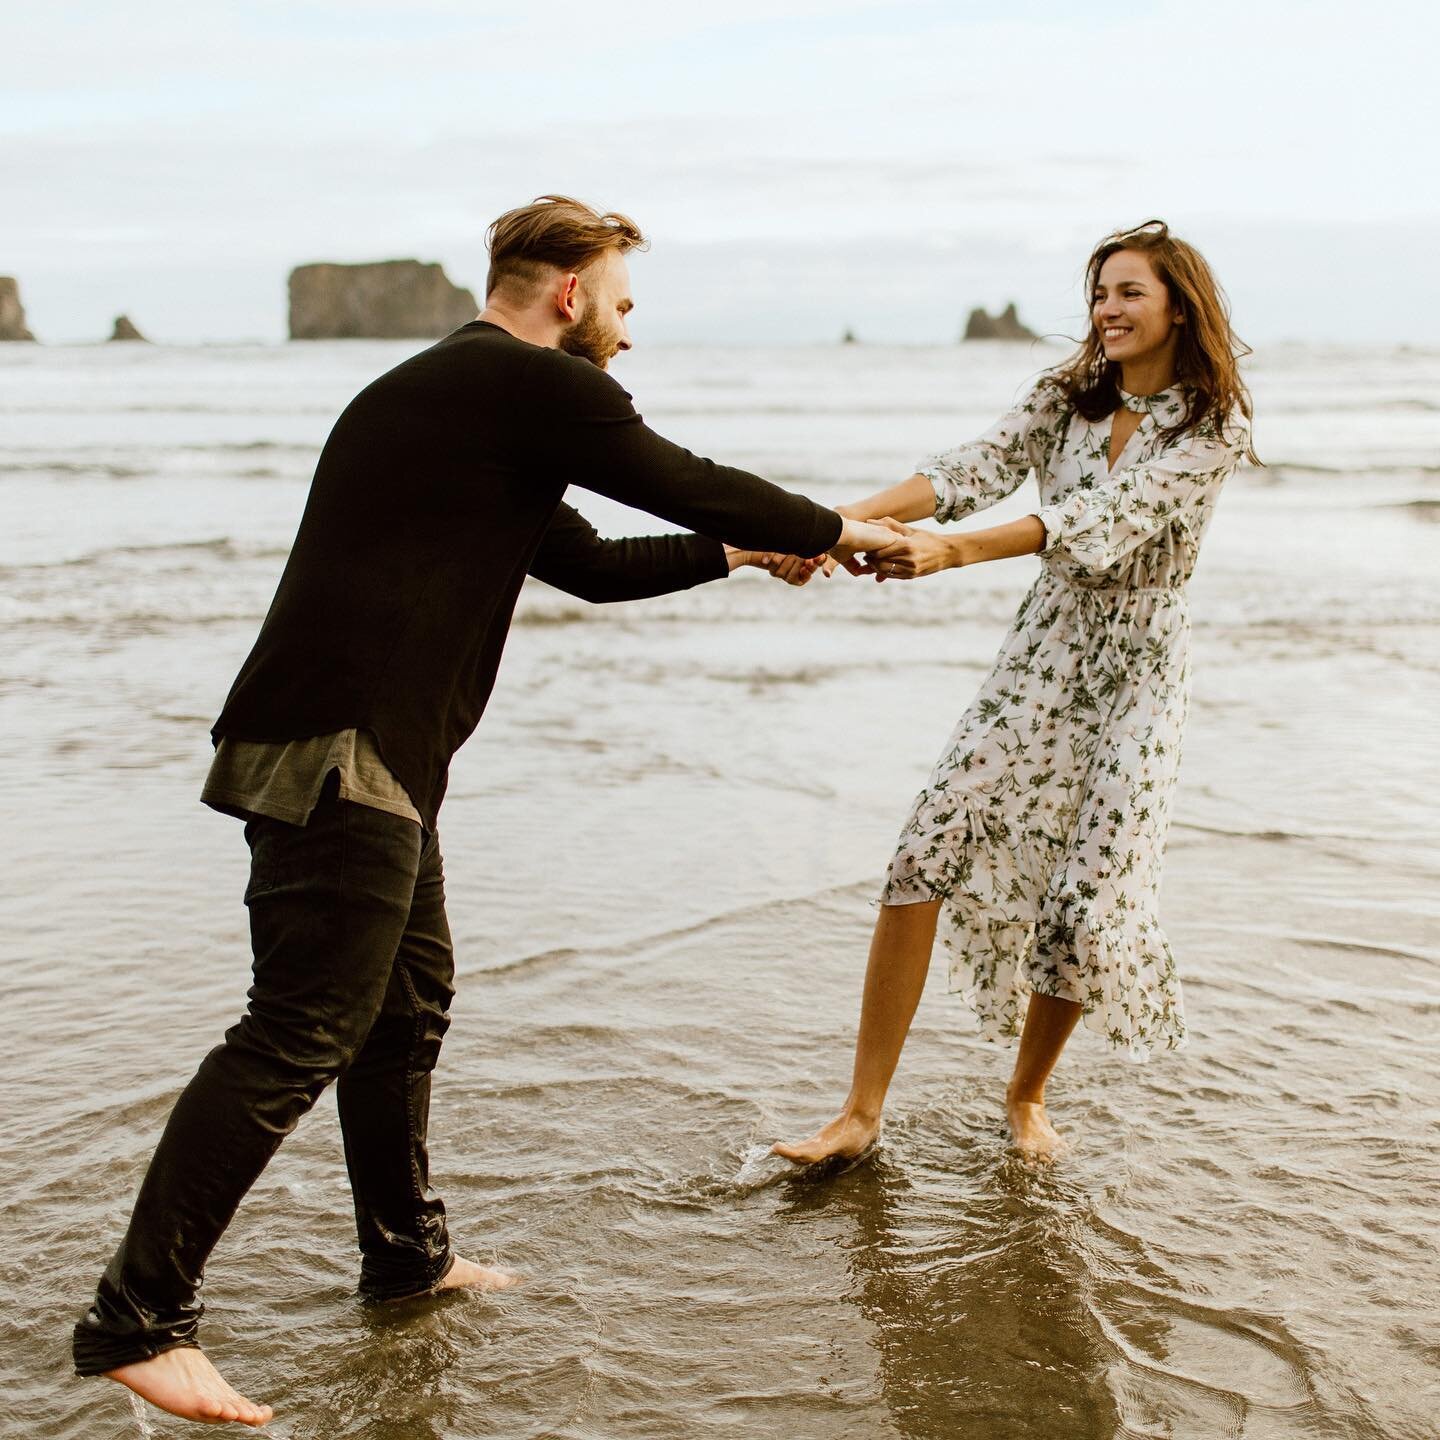 This Oregon session will be on the blog soon 🤎 Loved running around the coast with these two!